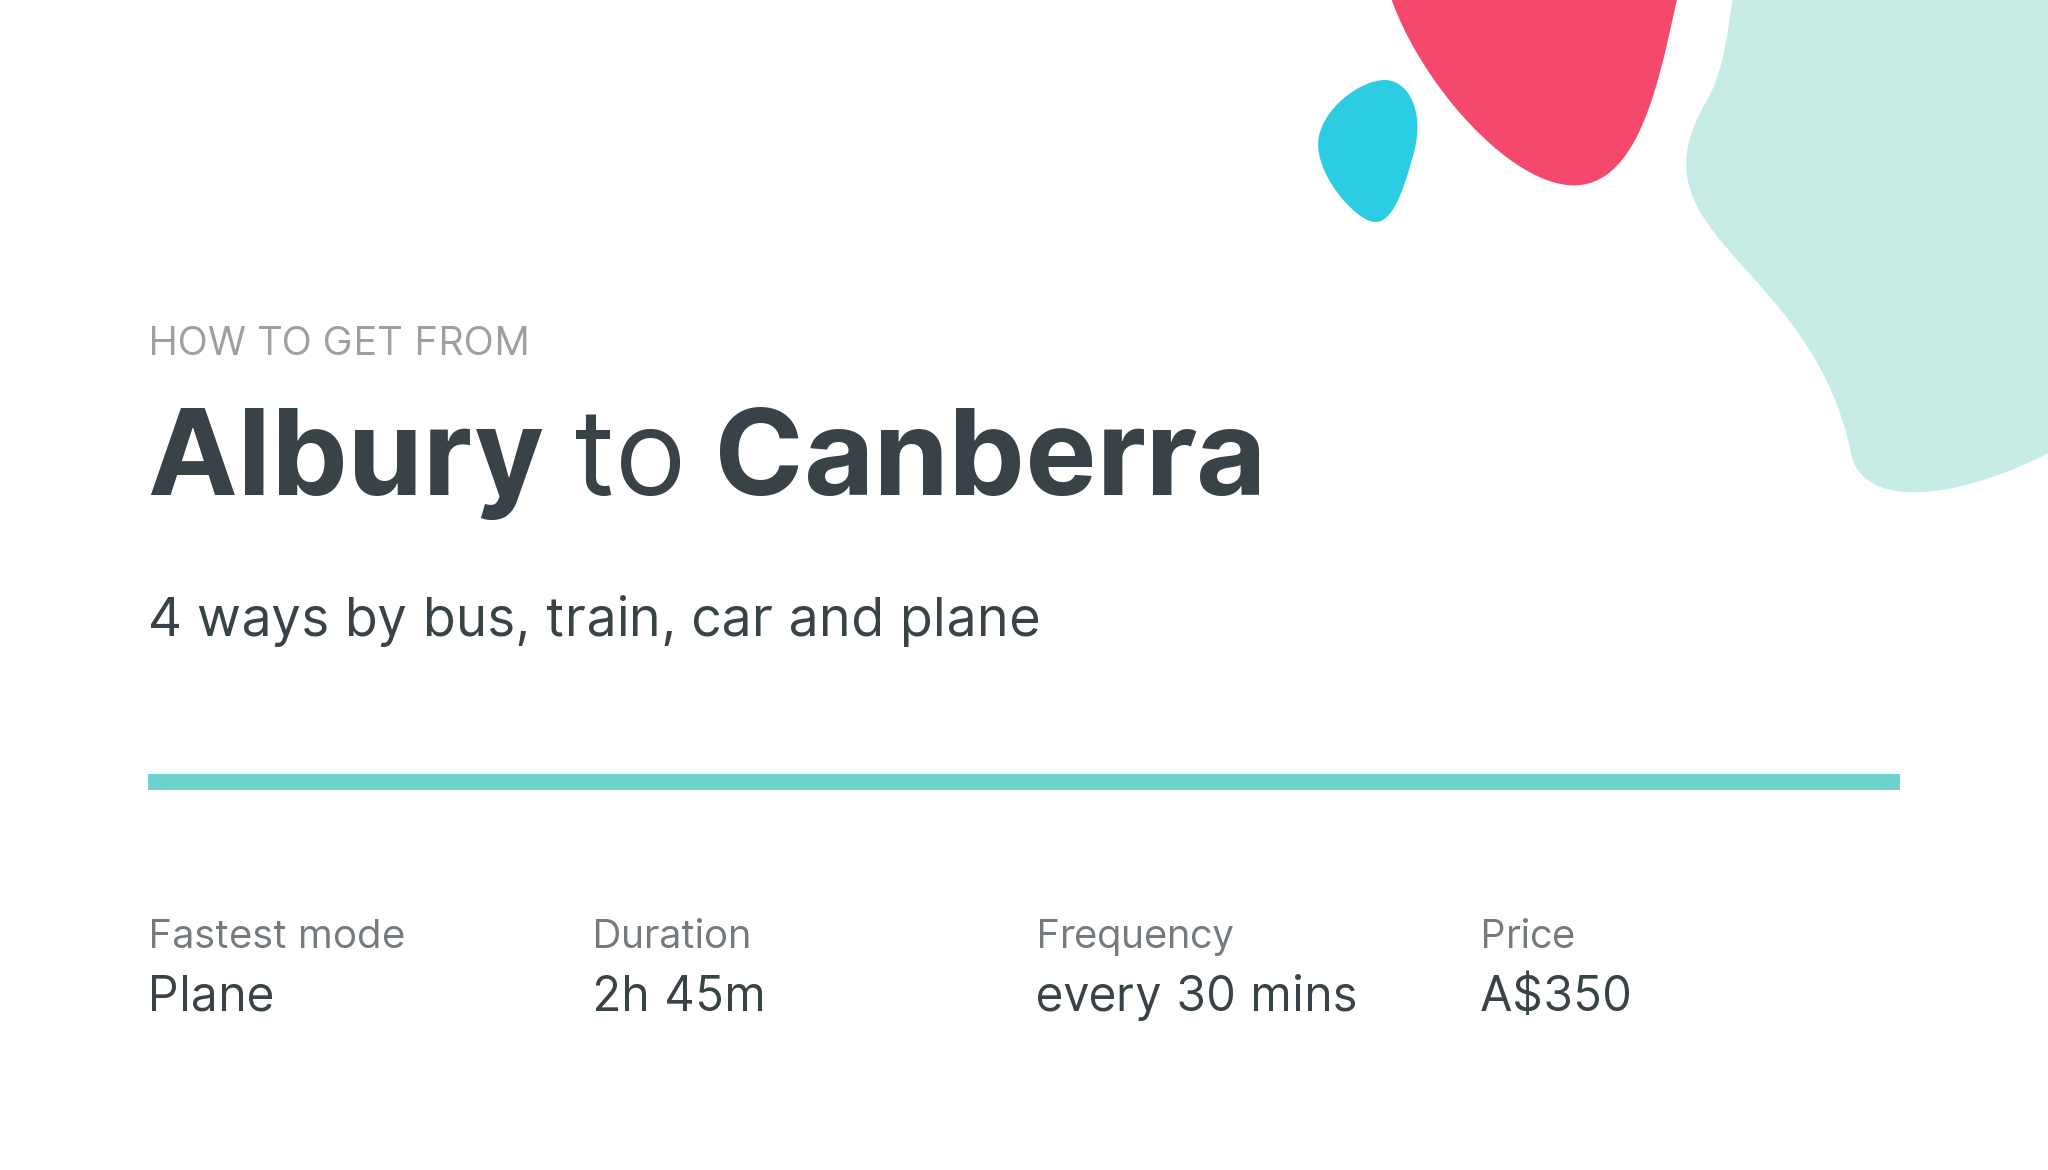 How do I get from Albury to Canberra